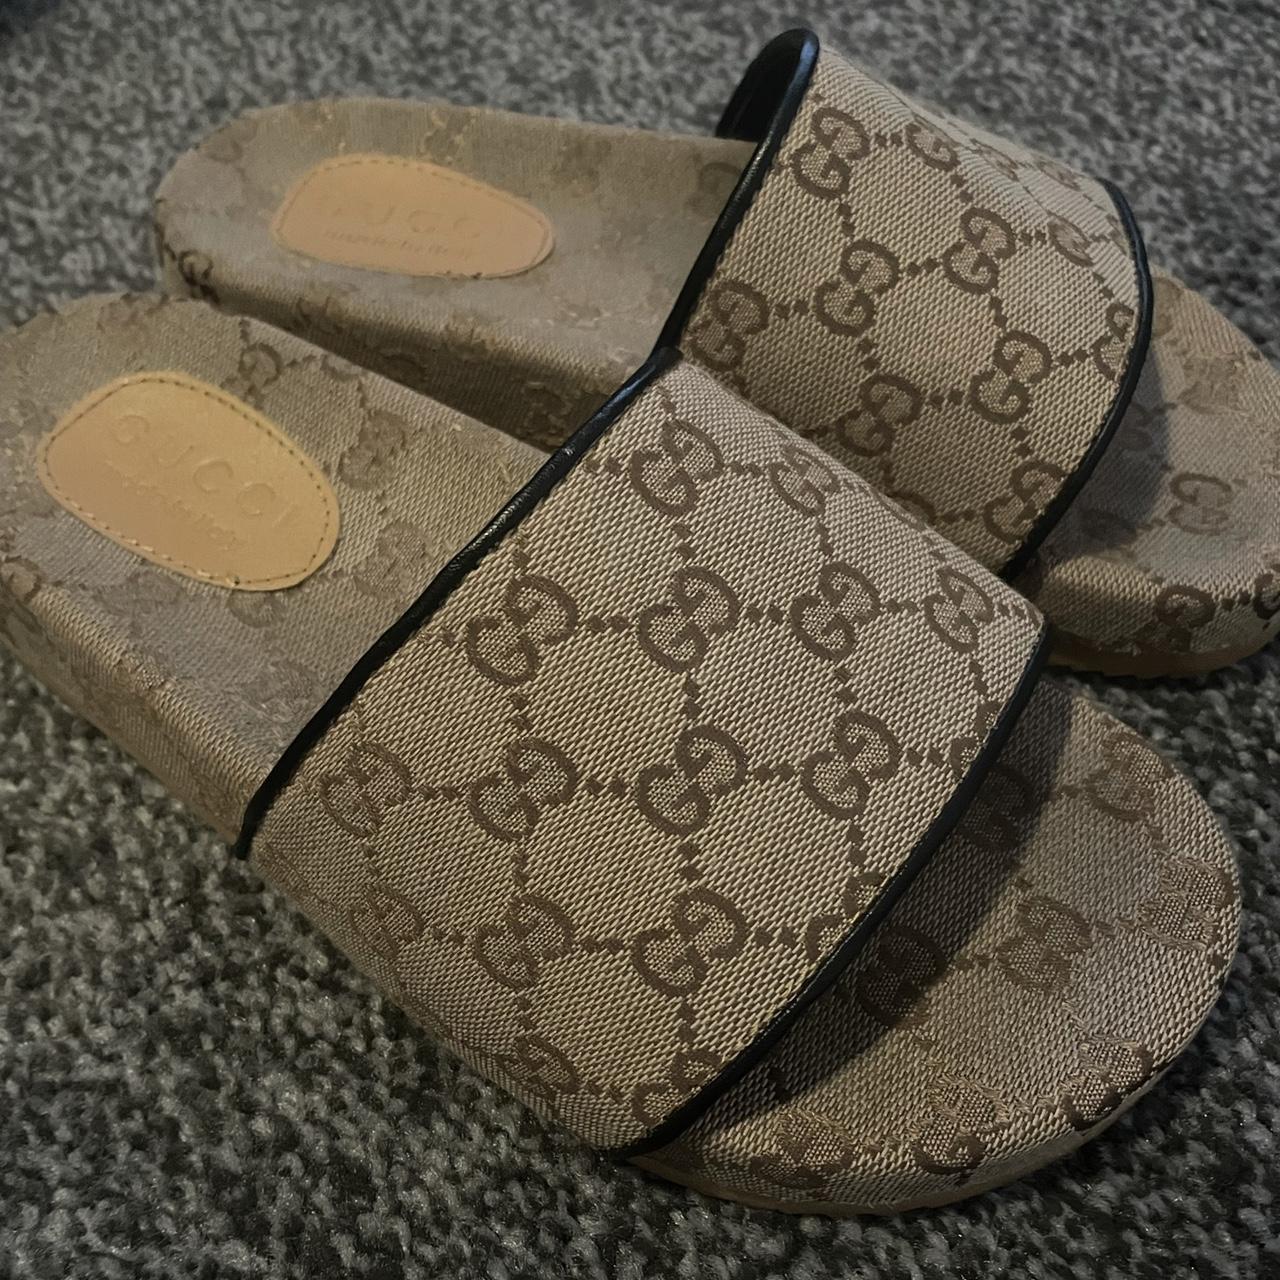 Gucci sliders worn a couple of times like new - Depop